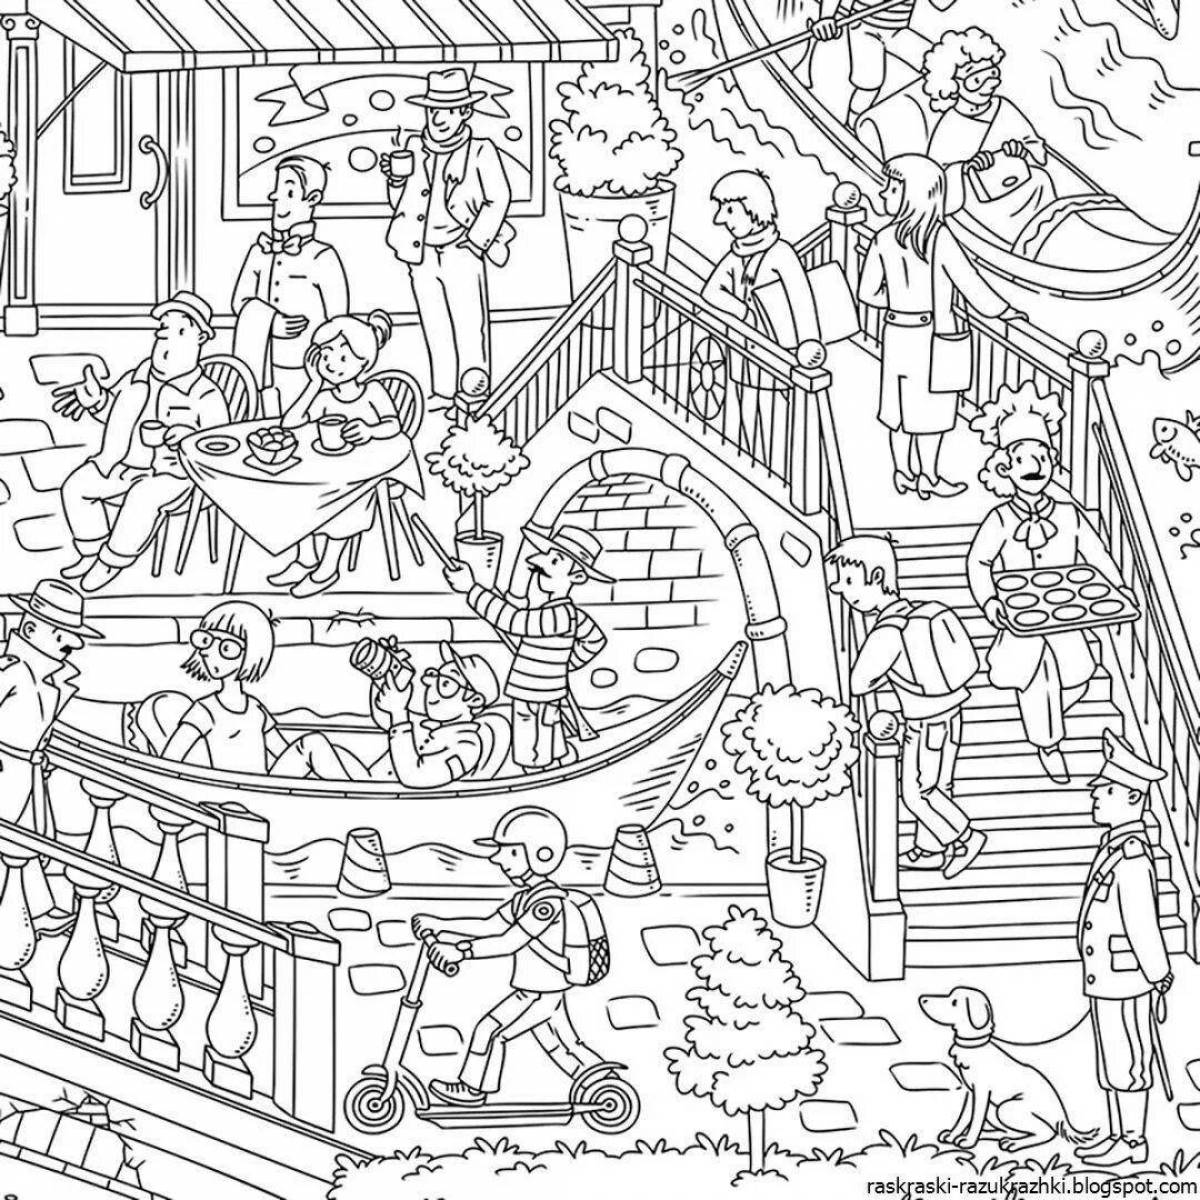 Glorious wimmelbuch coloring book for girls